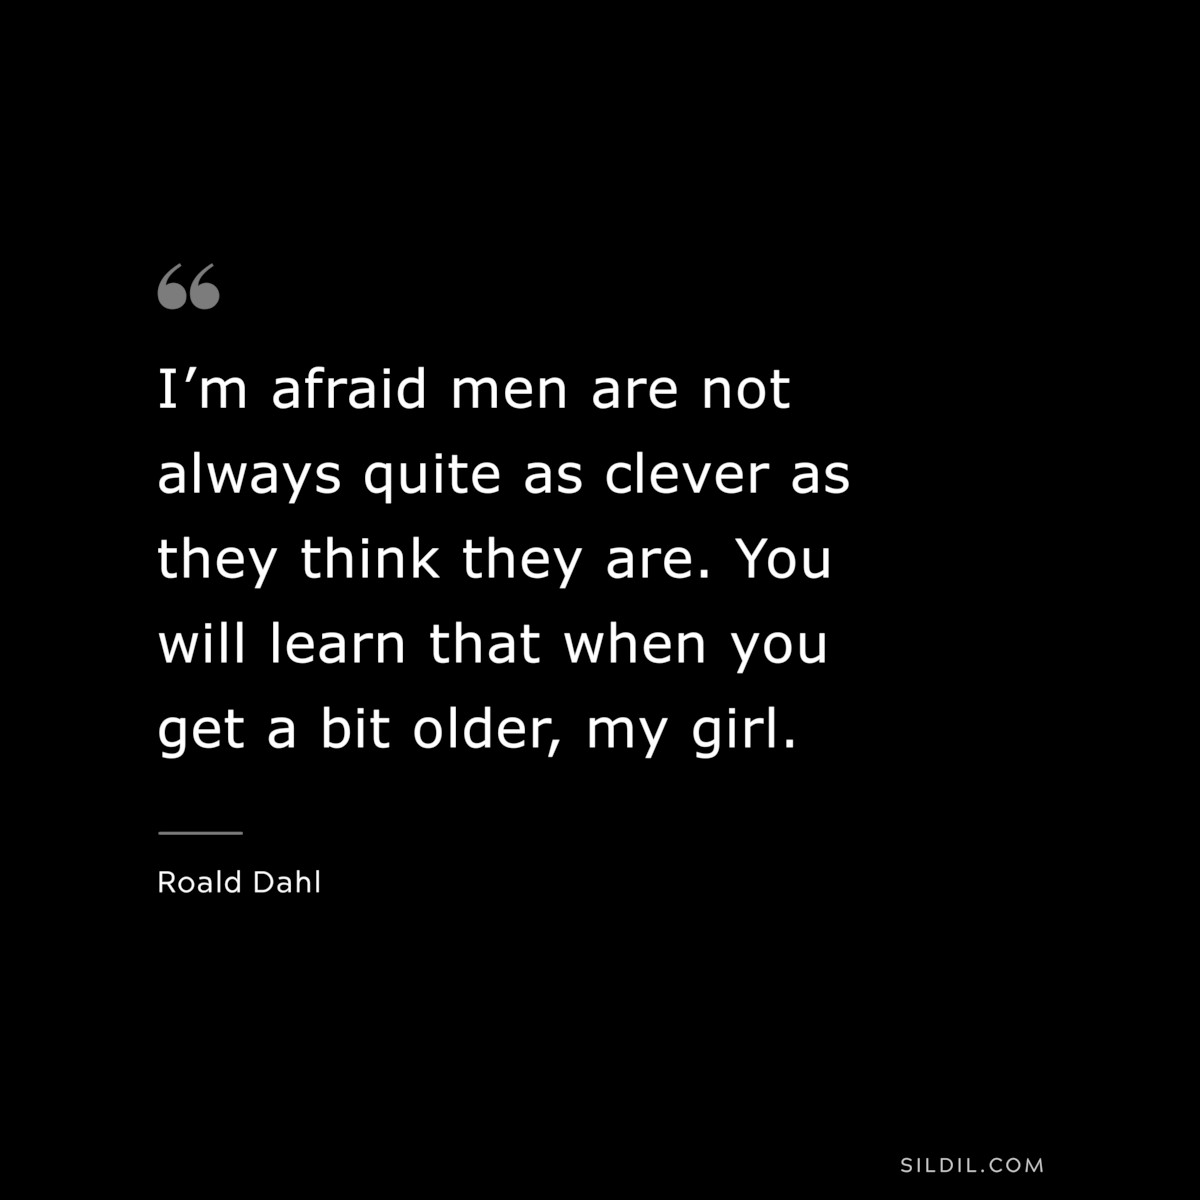 I’m afraid men are not always quite as clever as they think they are. You will learn that when you get a bit older, my girl. ― Roald Dahl